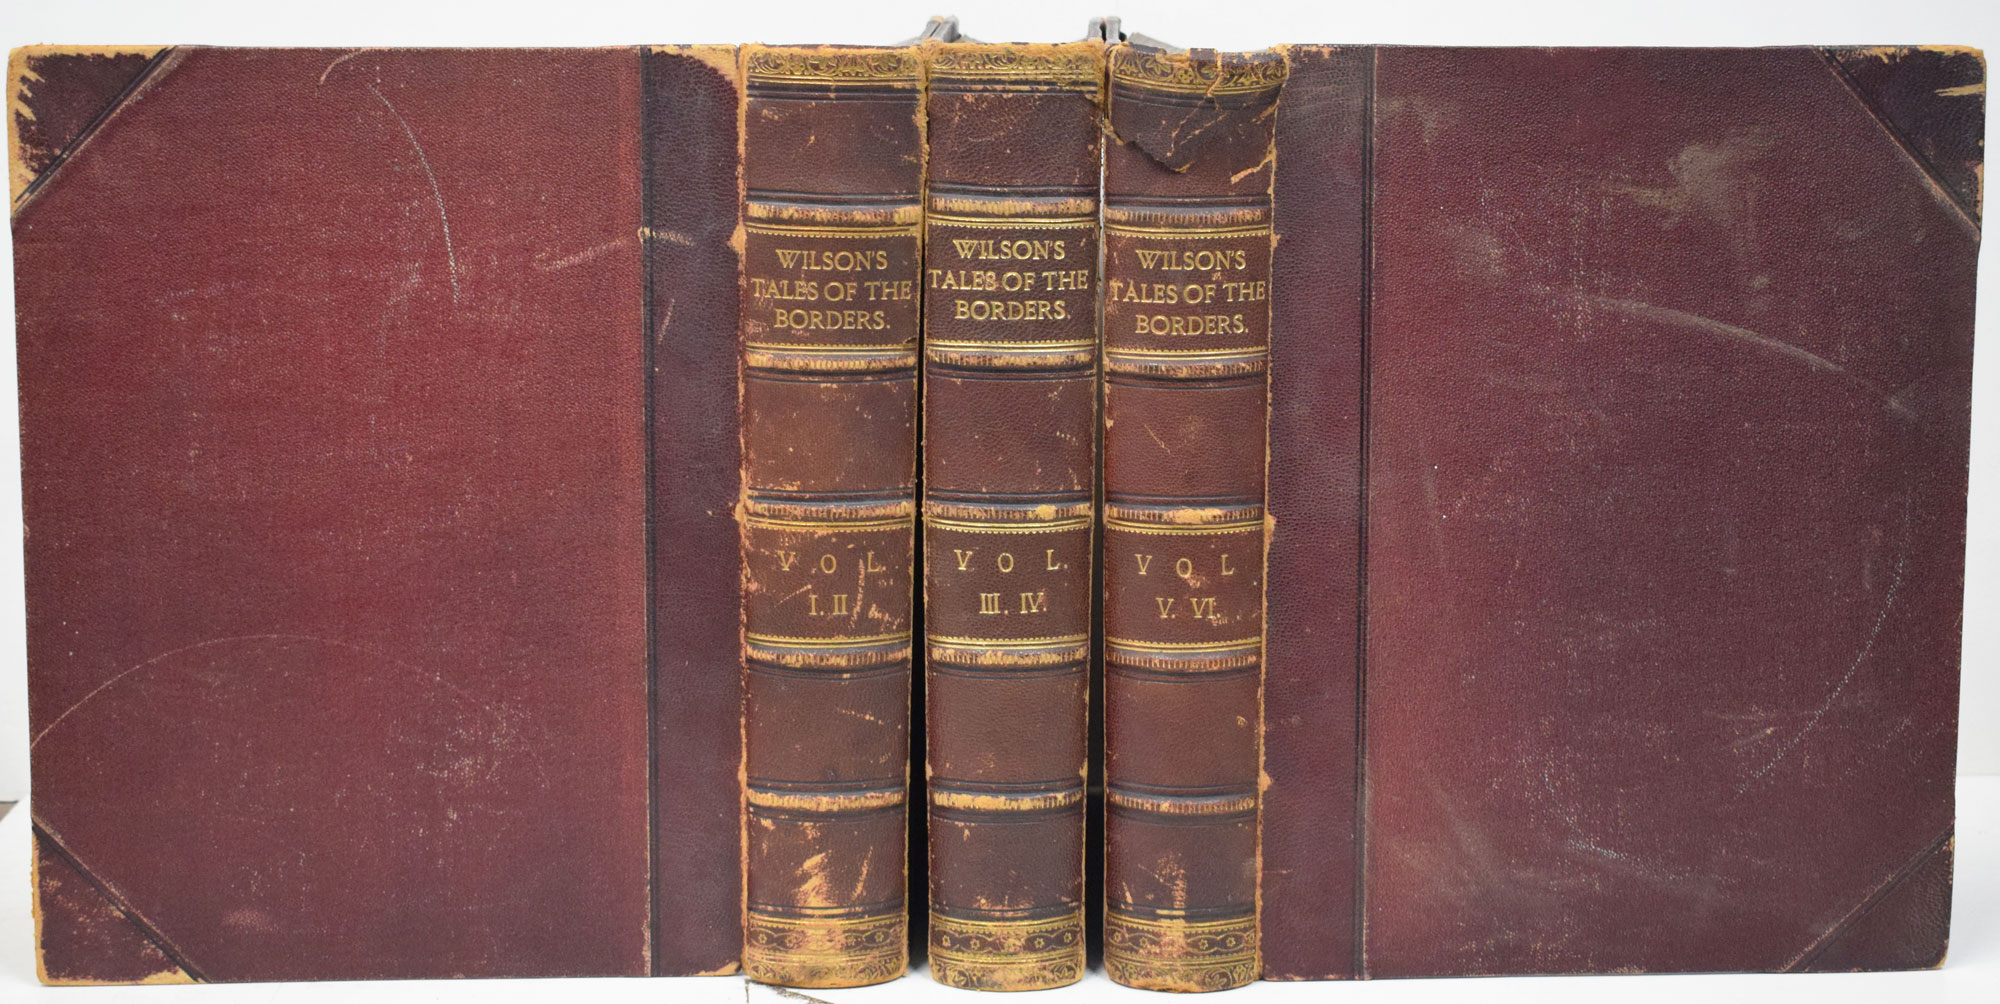 Wilson's Historical, Traditionary, and Imaginative Tales of the Borders and of Scotland. With an Illustrative Glossary of the Scottish Dialect. 6 volumes bound in 3. Mackenzie edition.